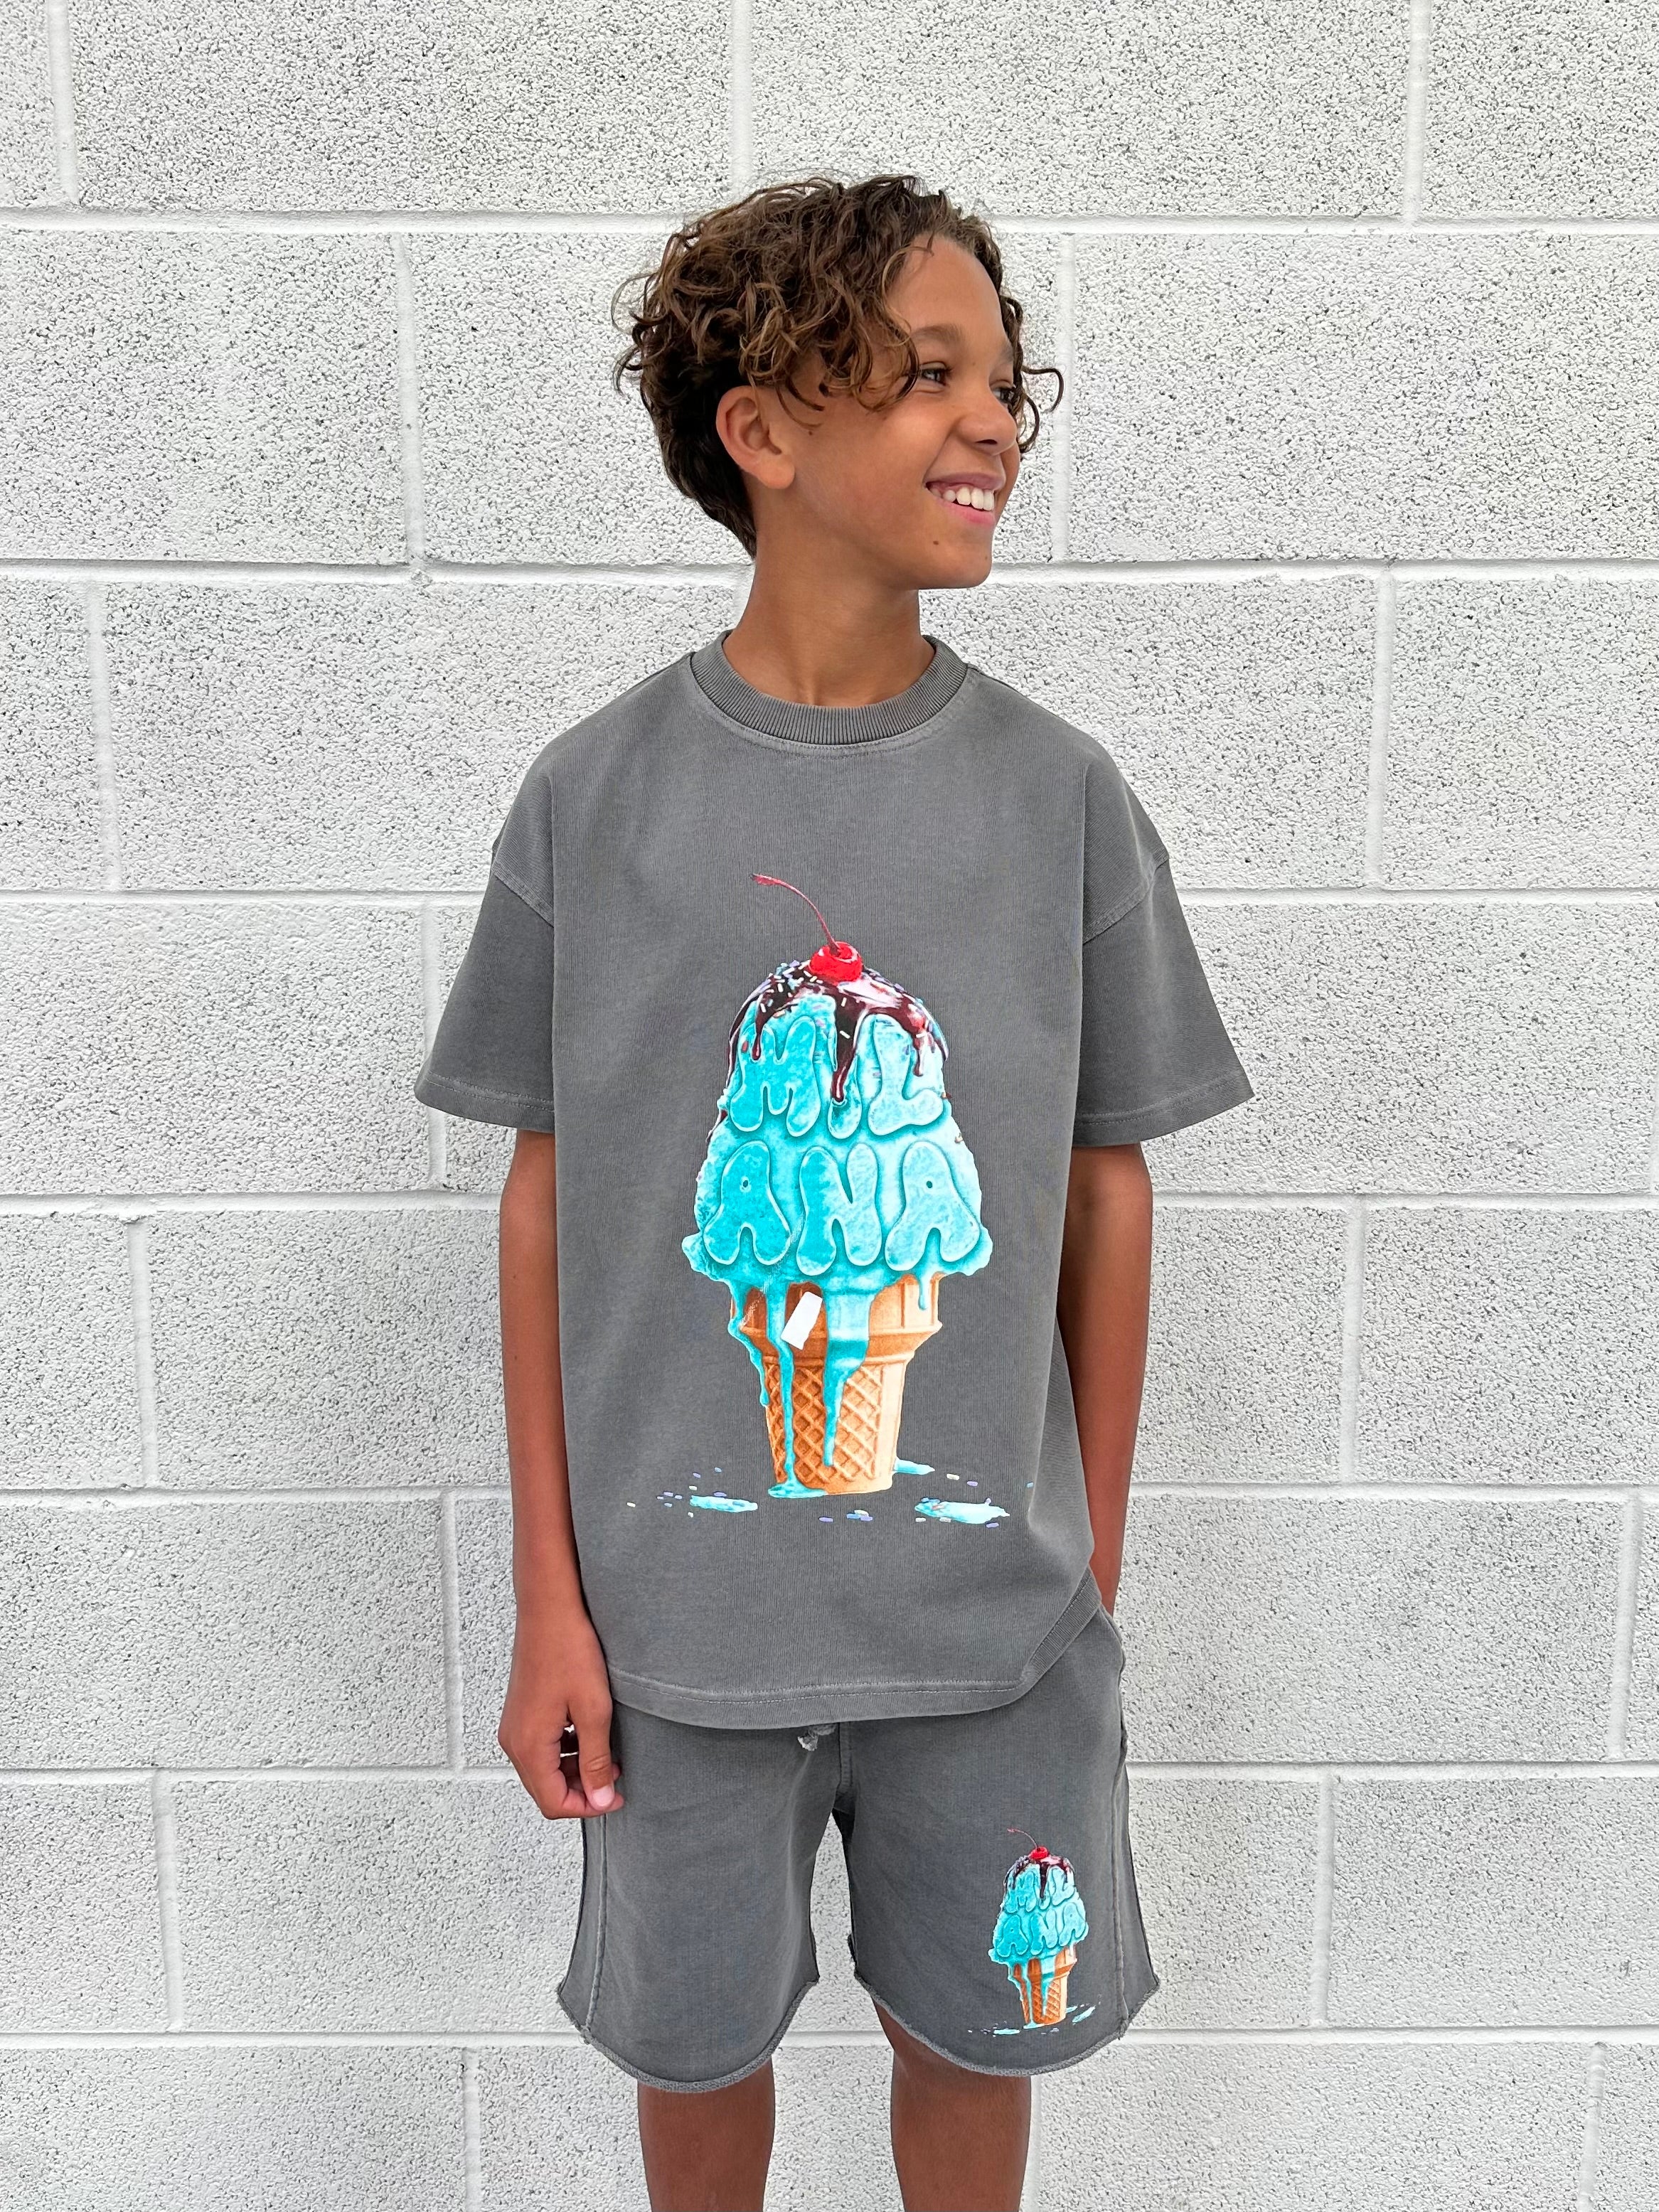 Washed Charcoal Ice Cream Kids T-shirt.